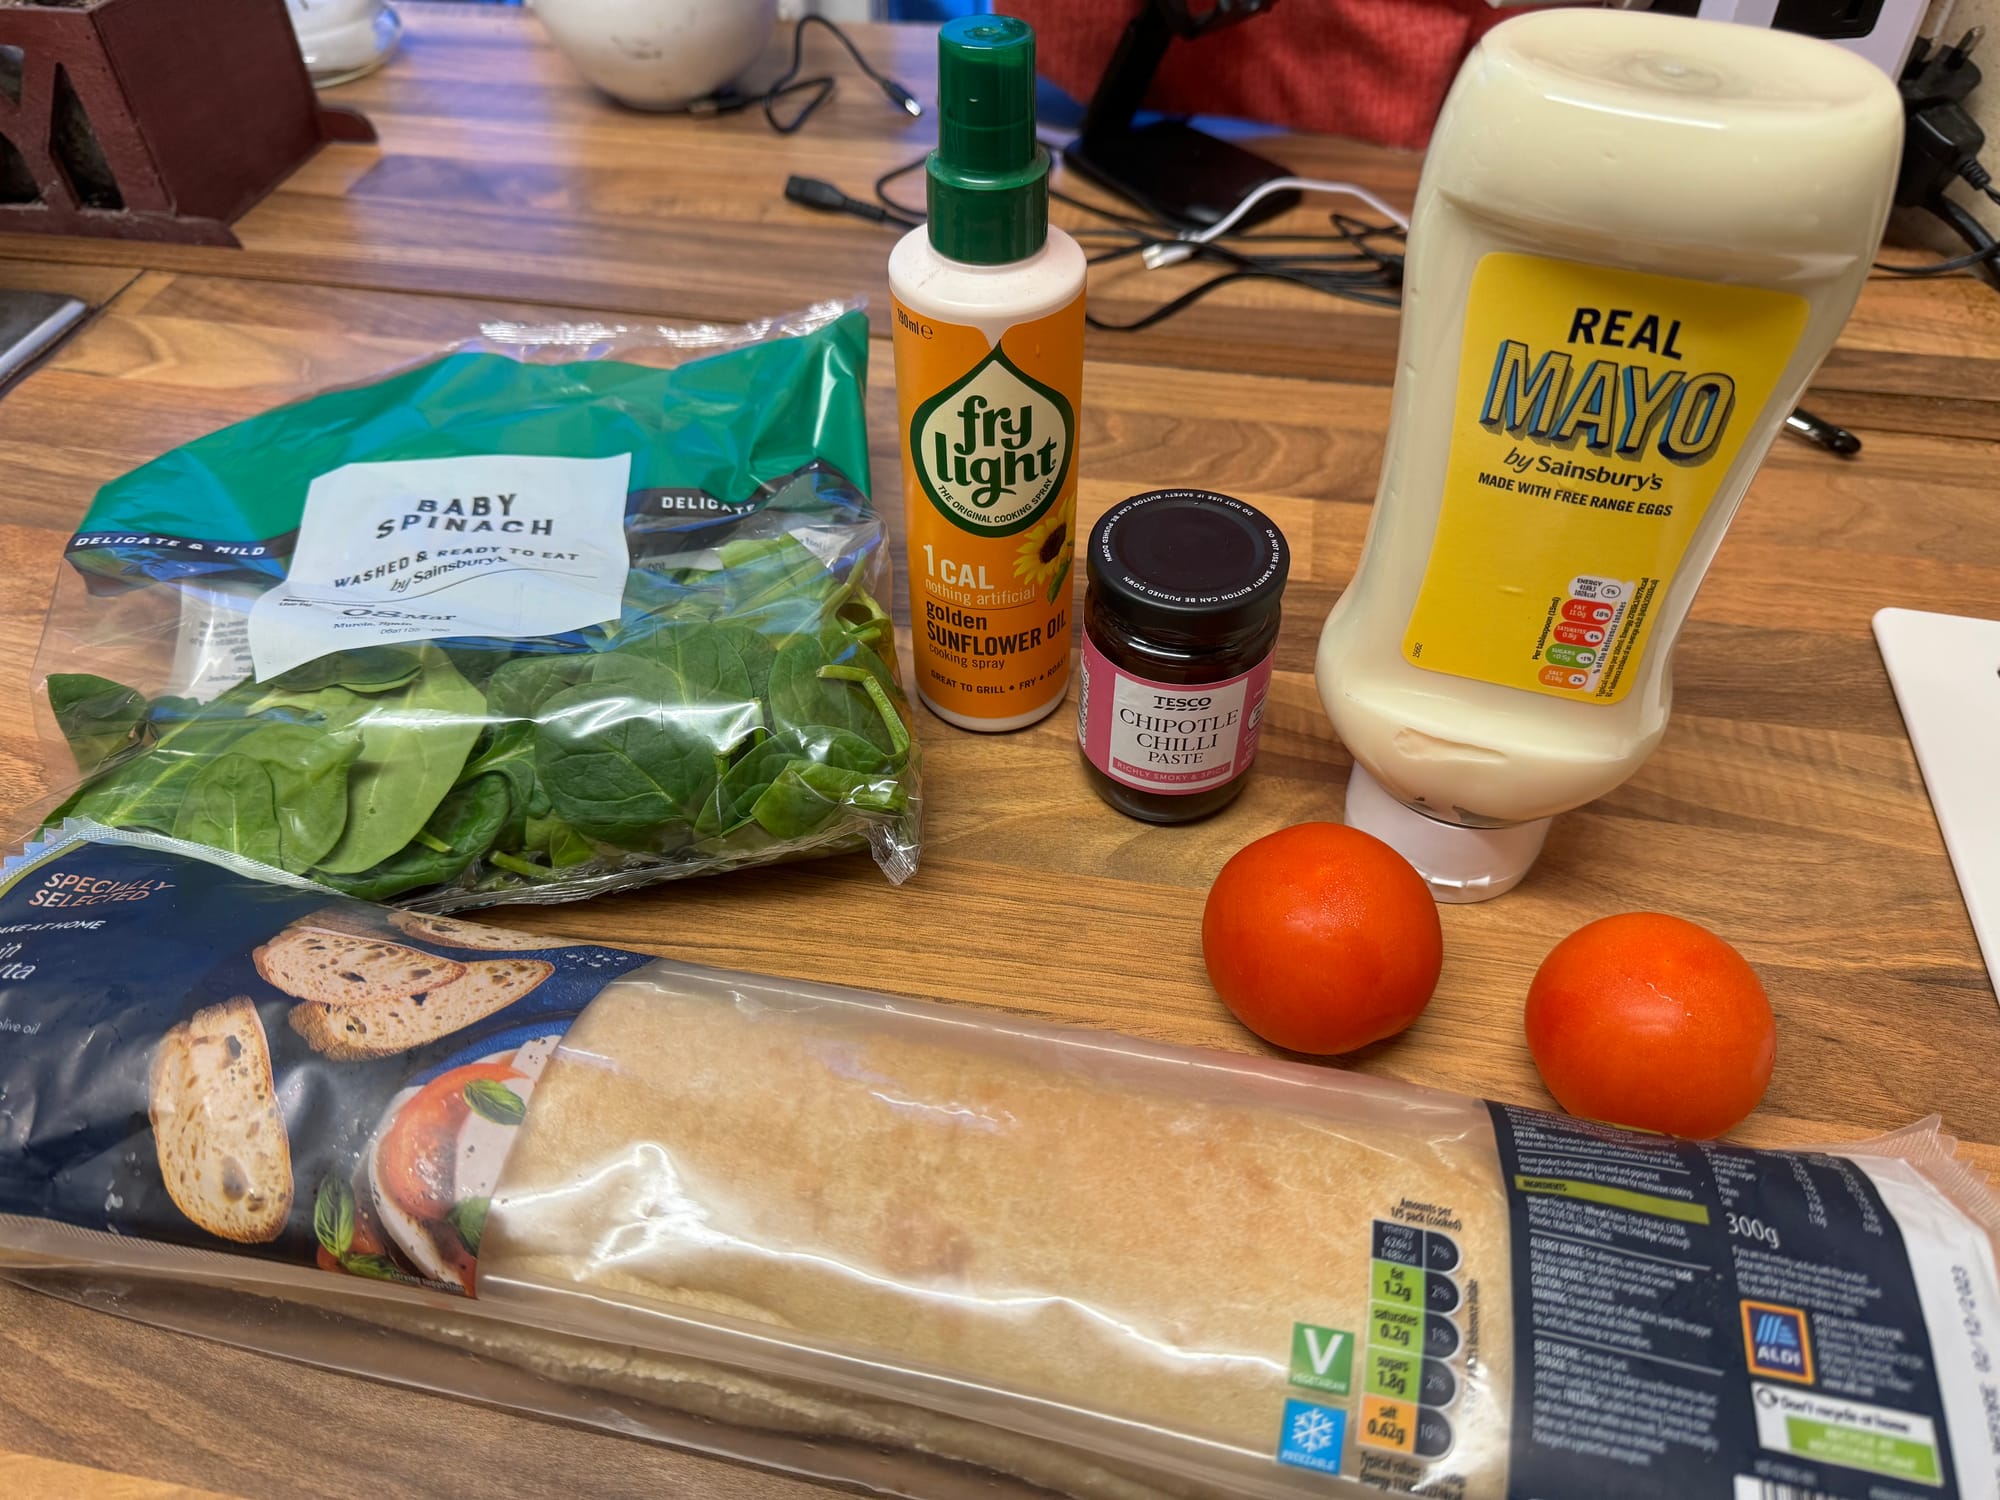 Ingredients for a sandwich on a table: spinach, tomato, bread, mayo, mustard, knife, cutting board.